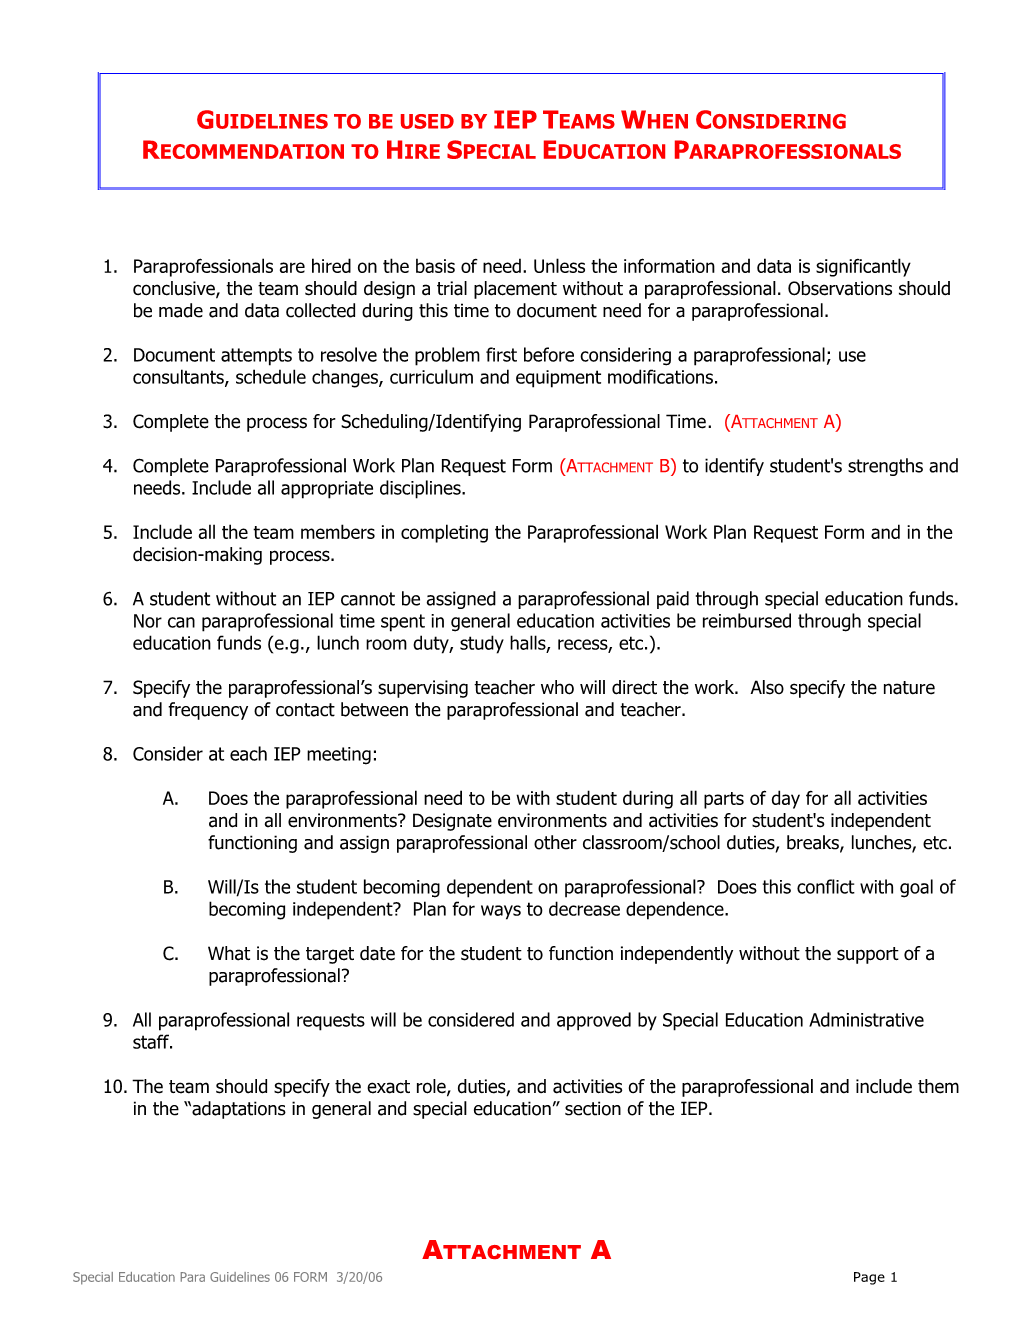 Guidelines to Be Used by Special Education Teams When Considering Recommendation to Hire